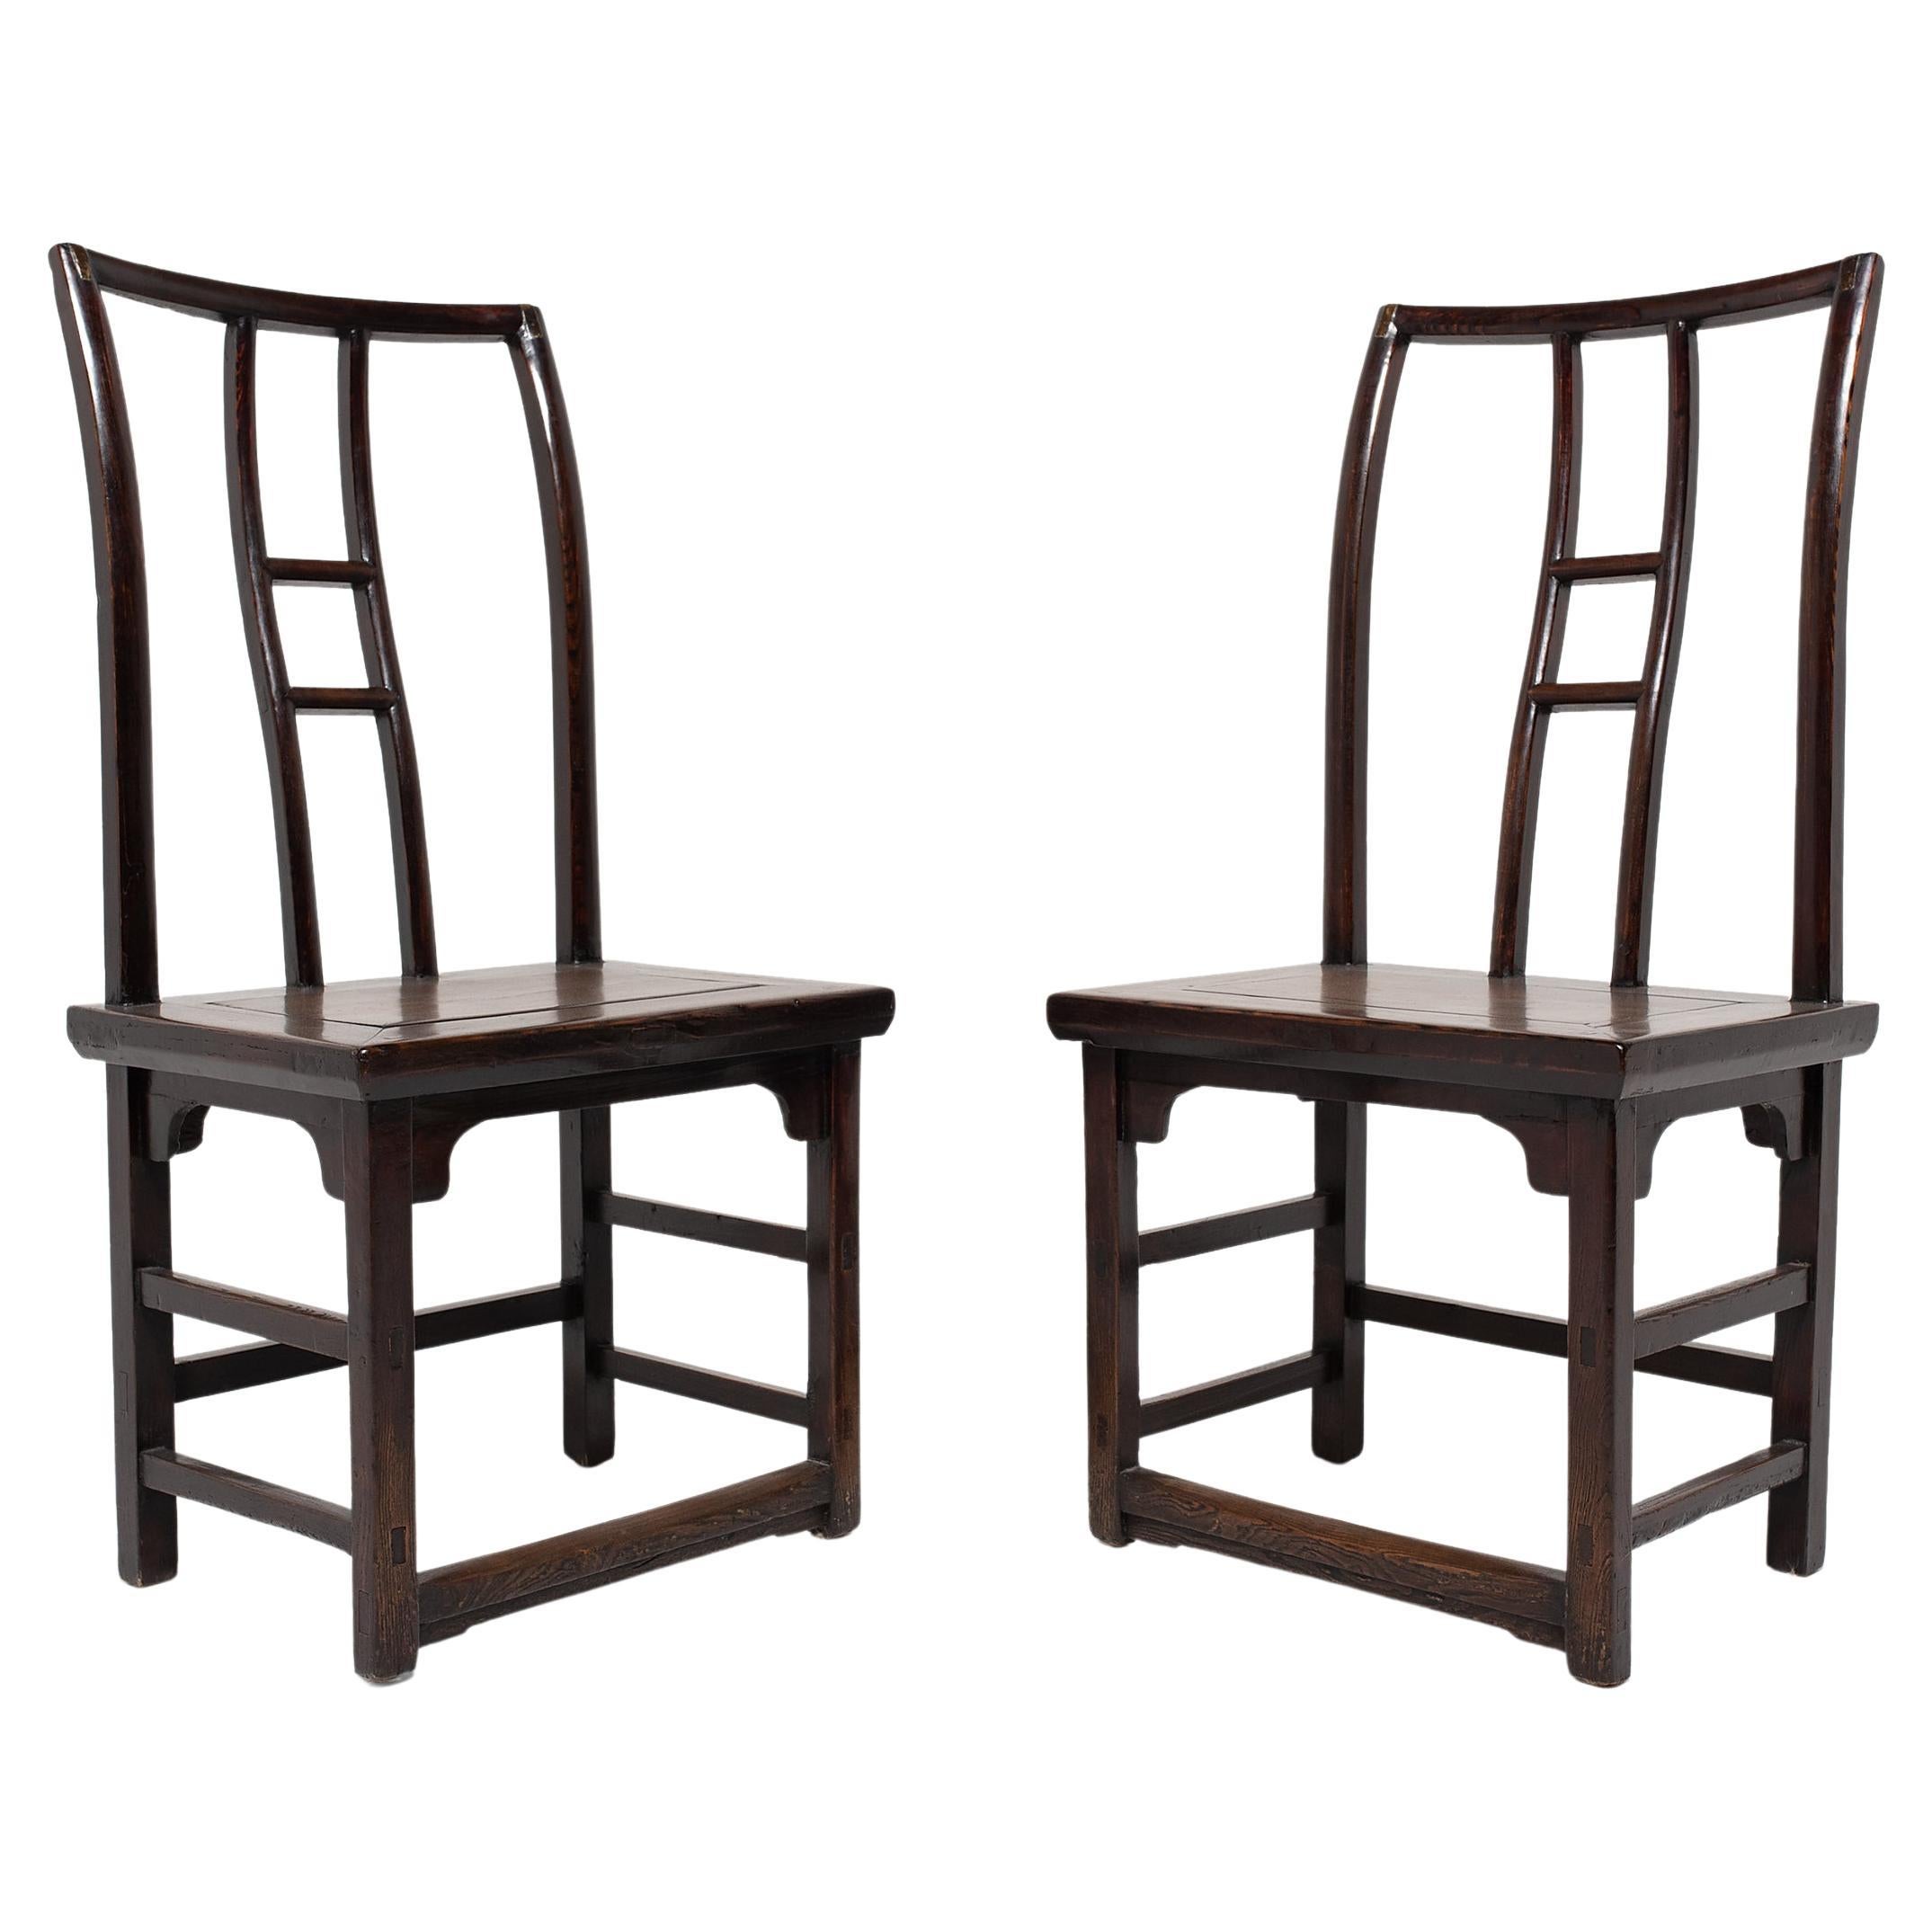 Pair of Chinese Lacquered Tall Back Chairs, c. 1850